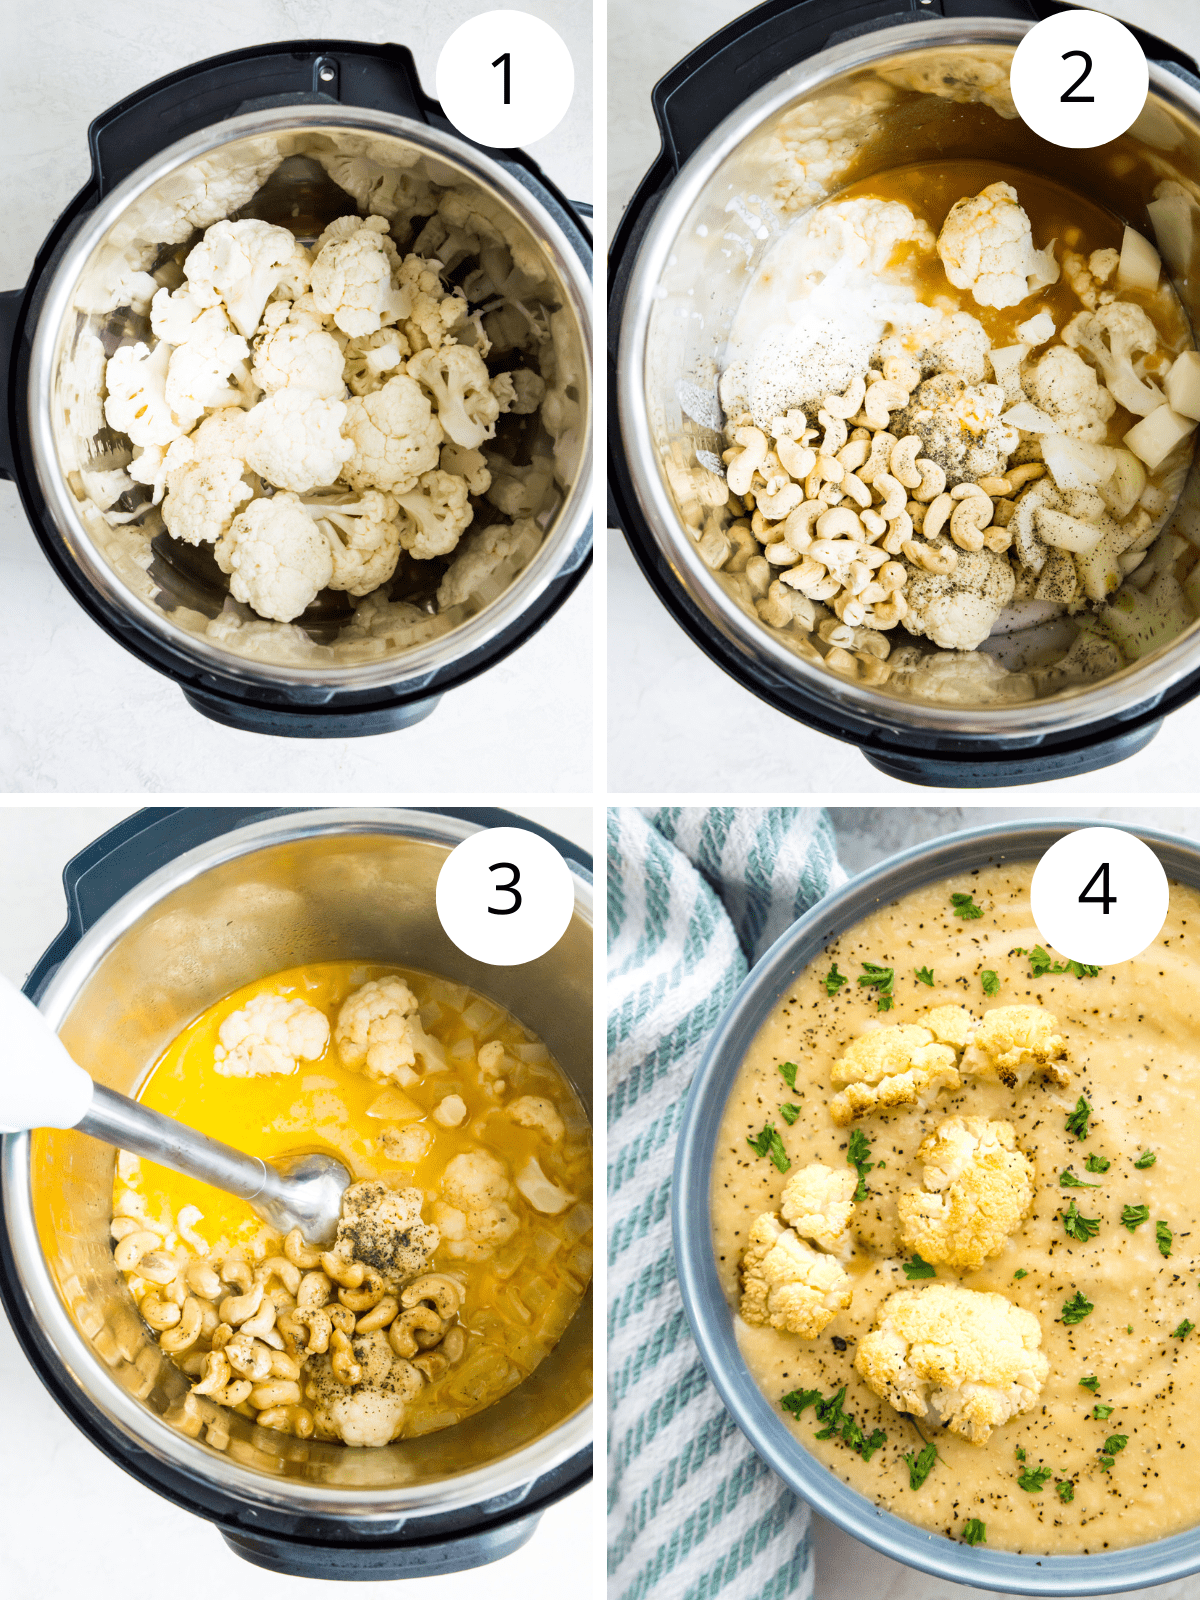 Step by step directions for making cauliflower soup in an Instant Pot.